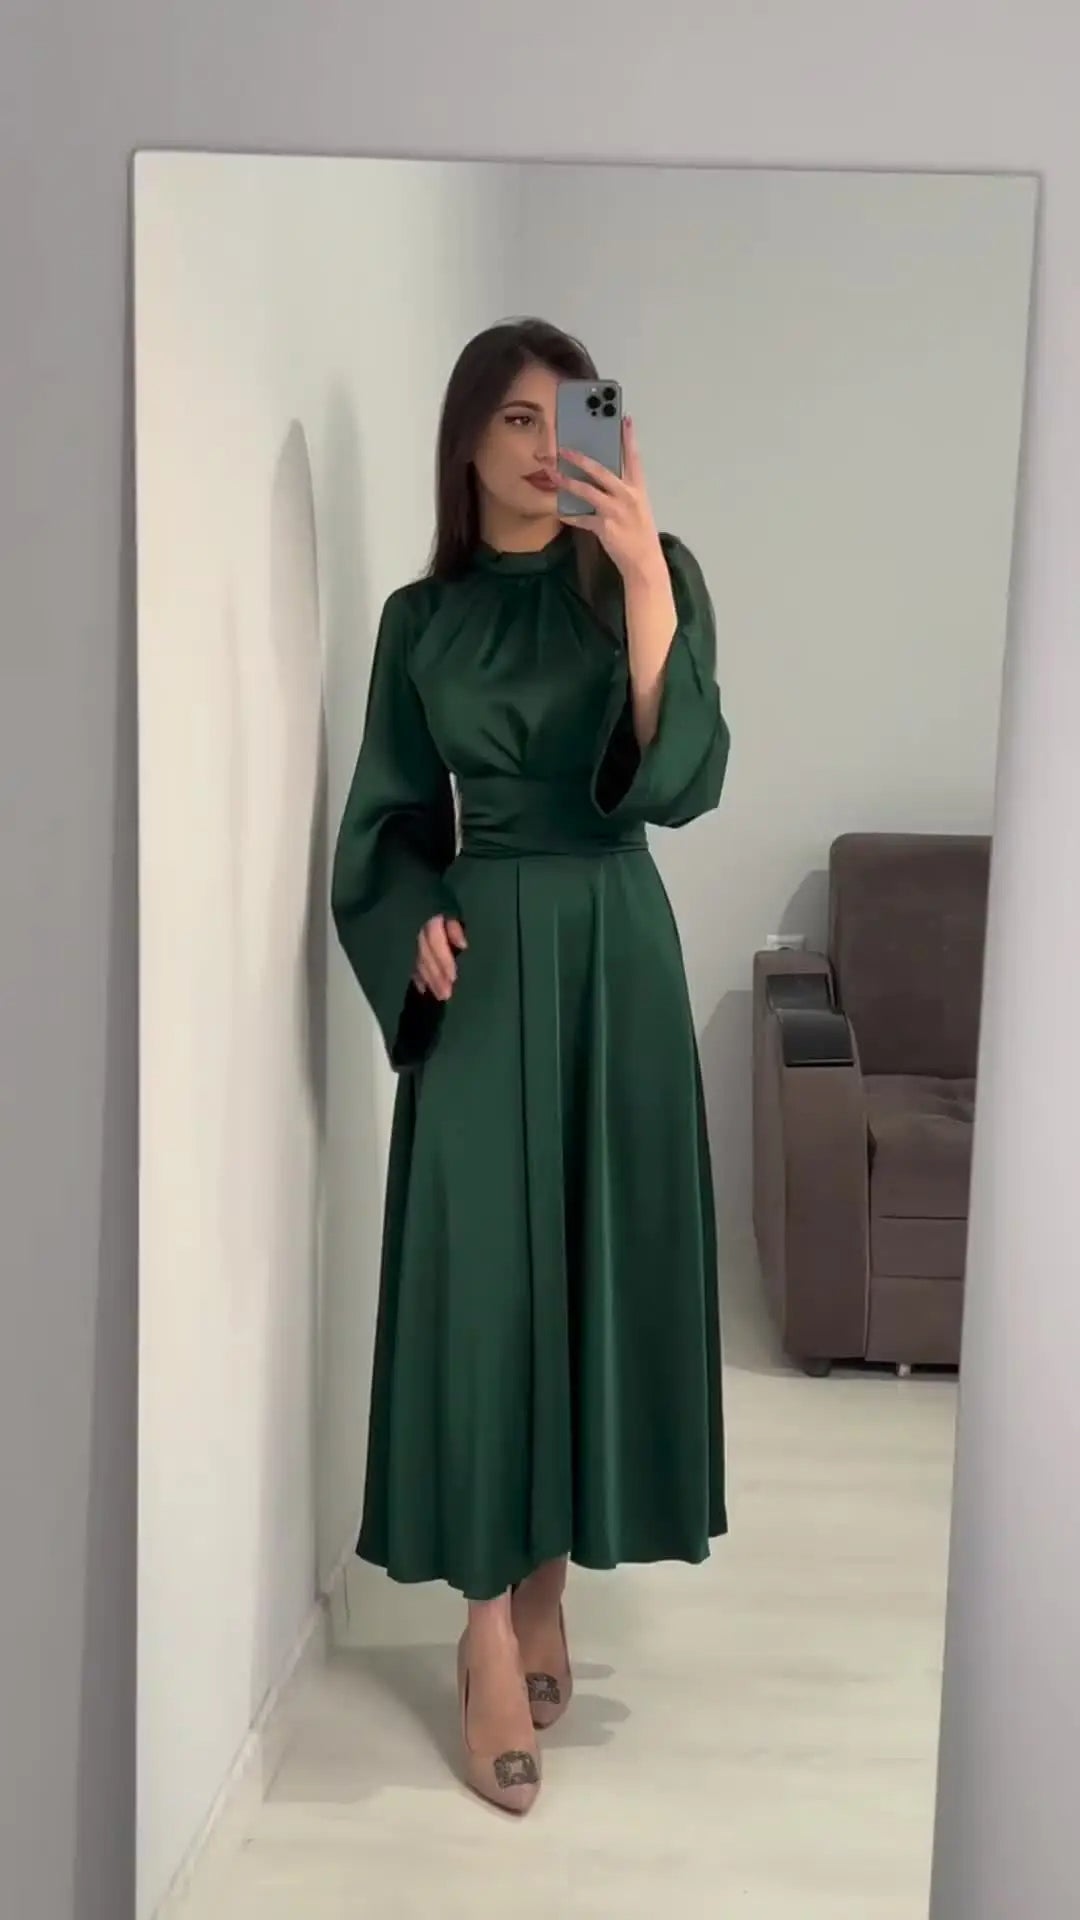 Long, soft dress in a solid color with a closed round neck, long puffed sleeves at the shoulders, and a wide waist belt